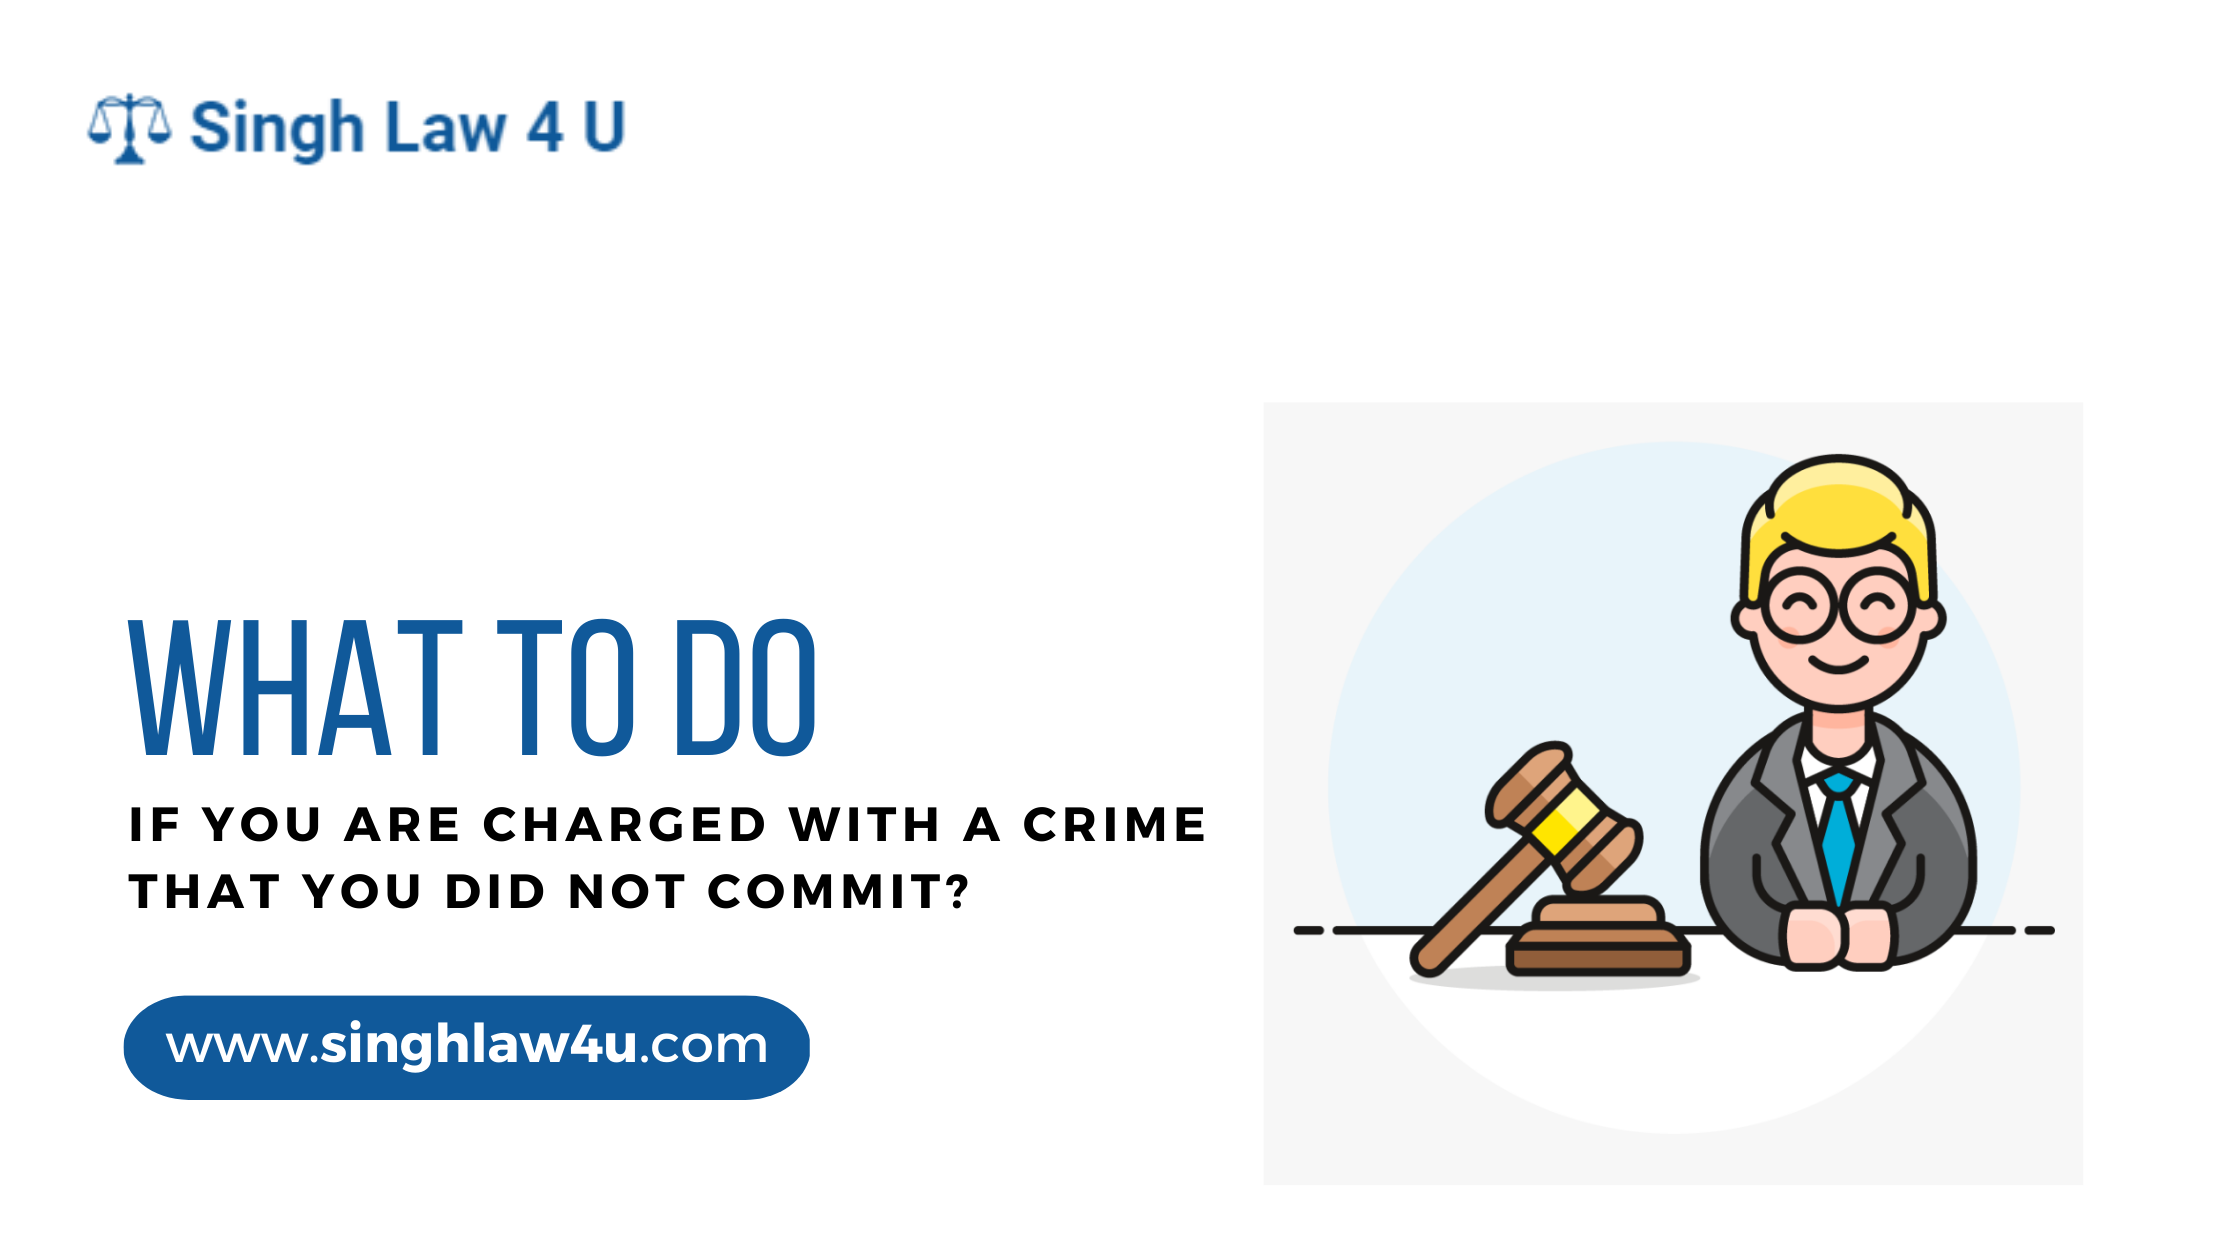 what to do if you are charged with a crime that you did not commit